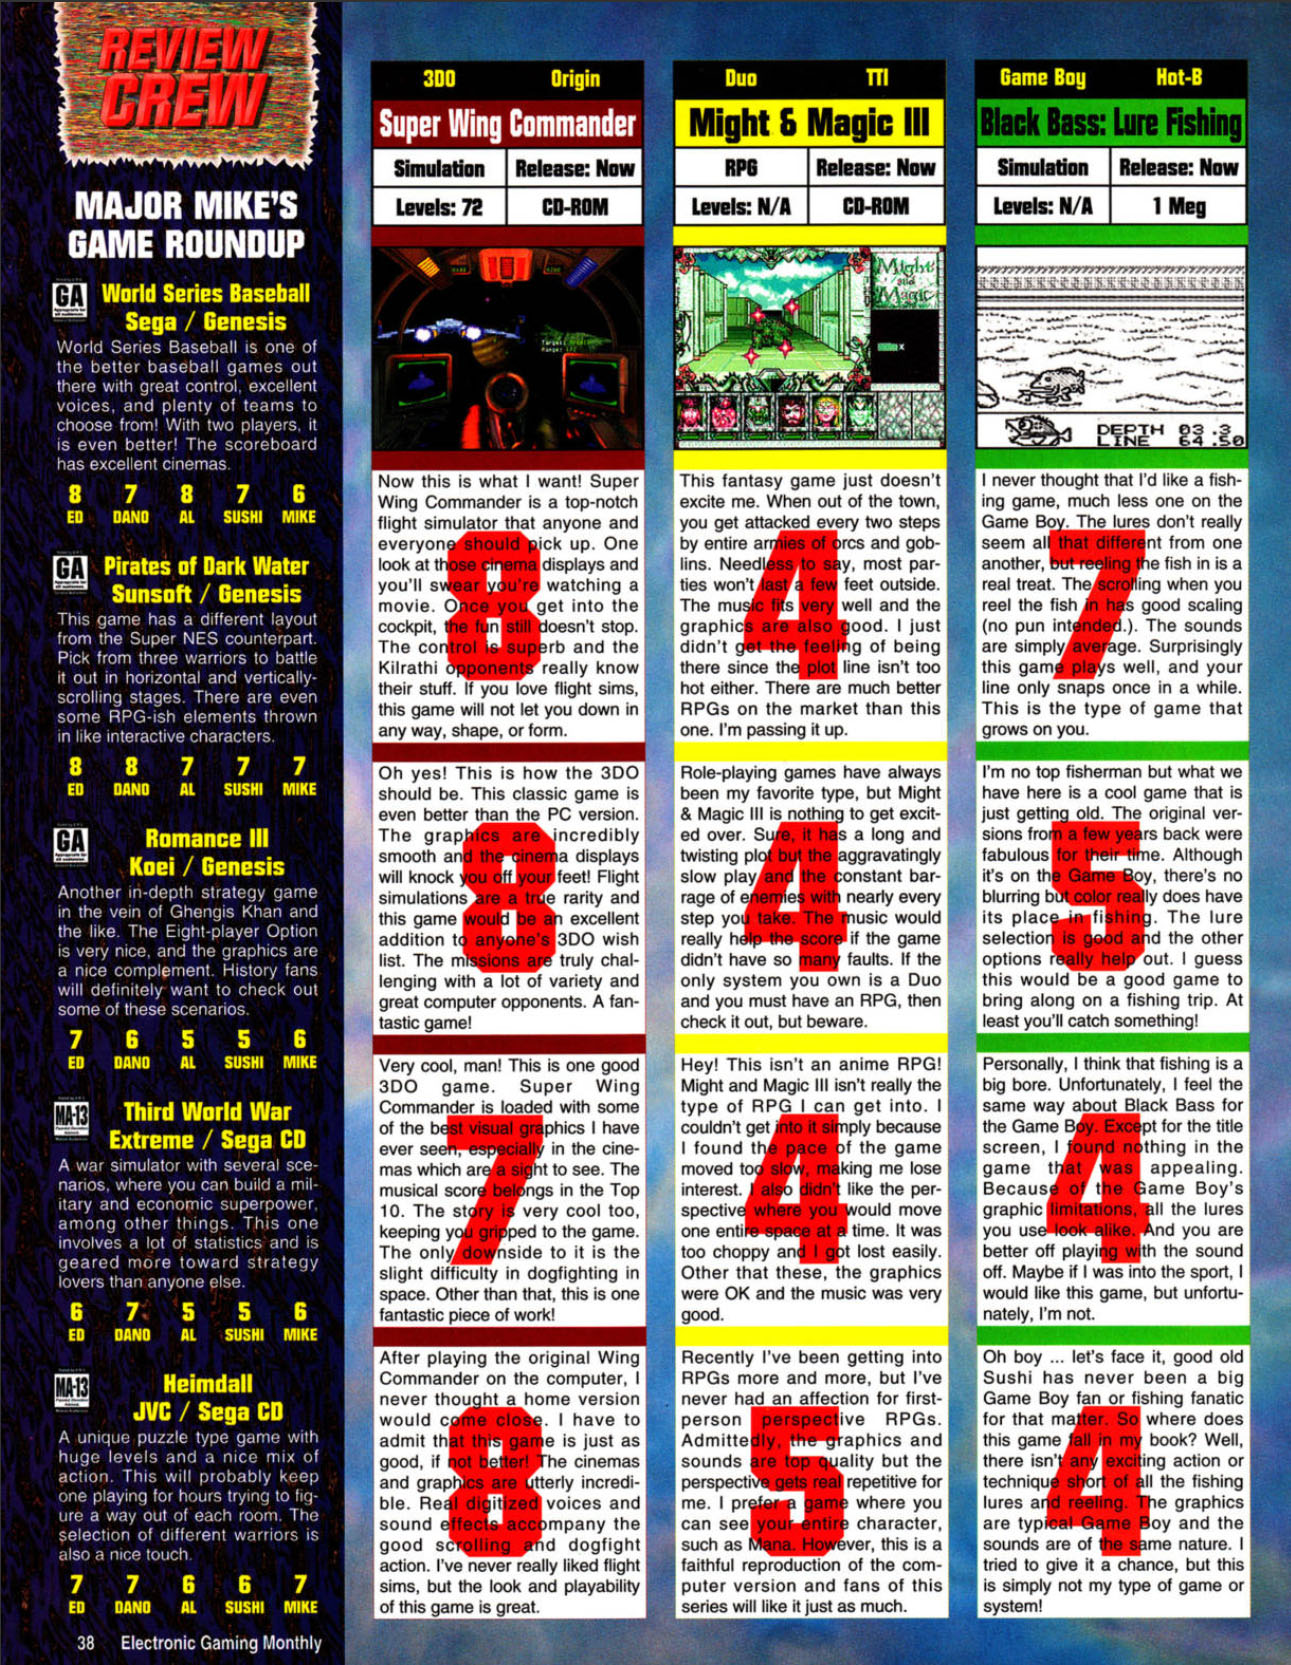 World Series Baseball Review, Electronic Gaming Monthly May 1994 page 38